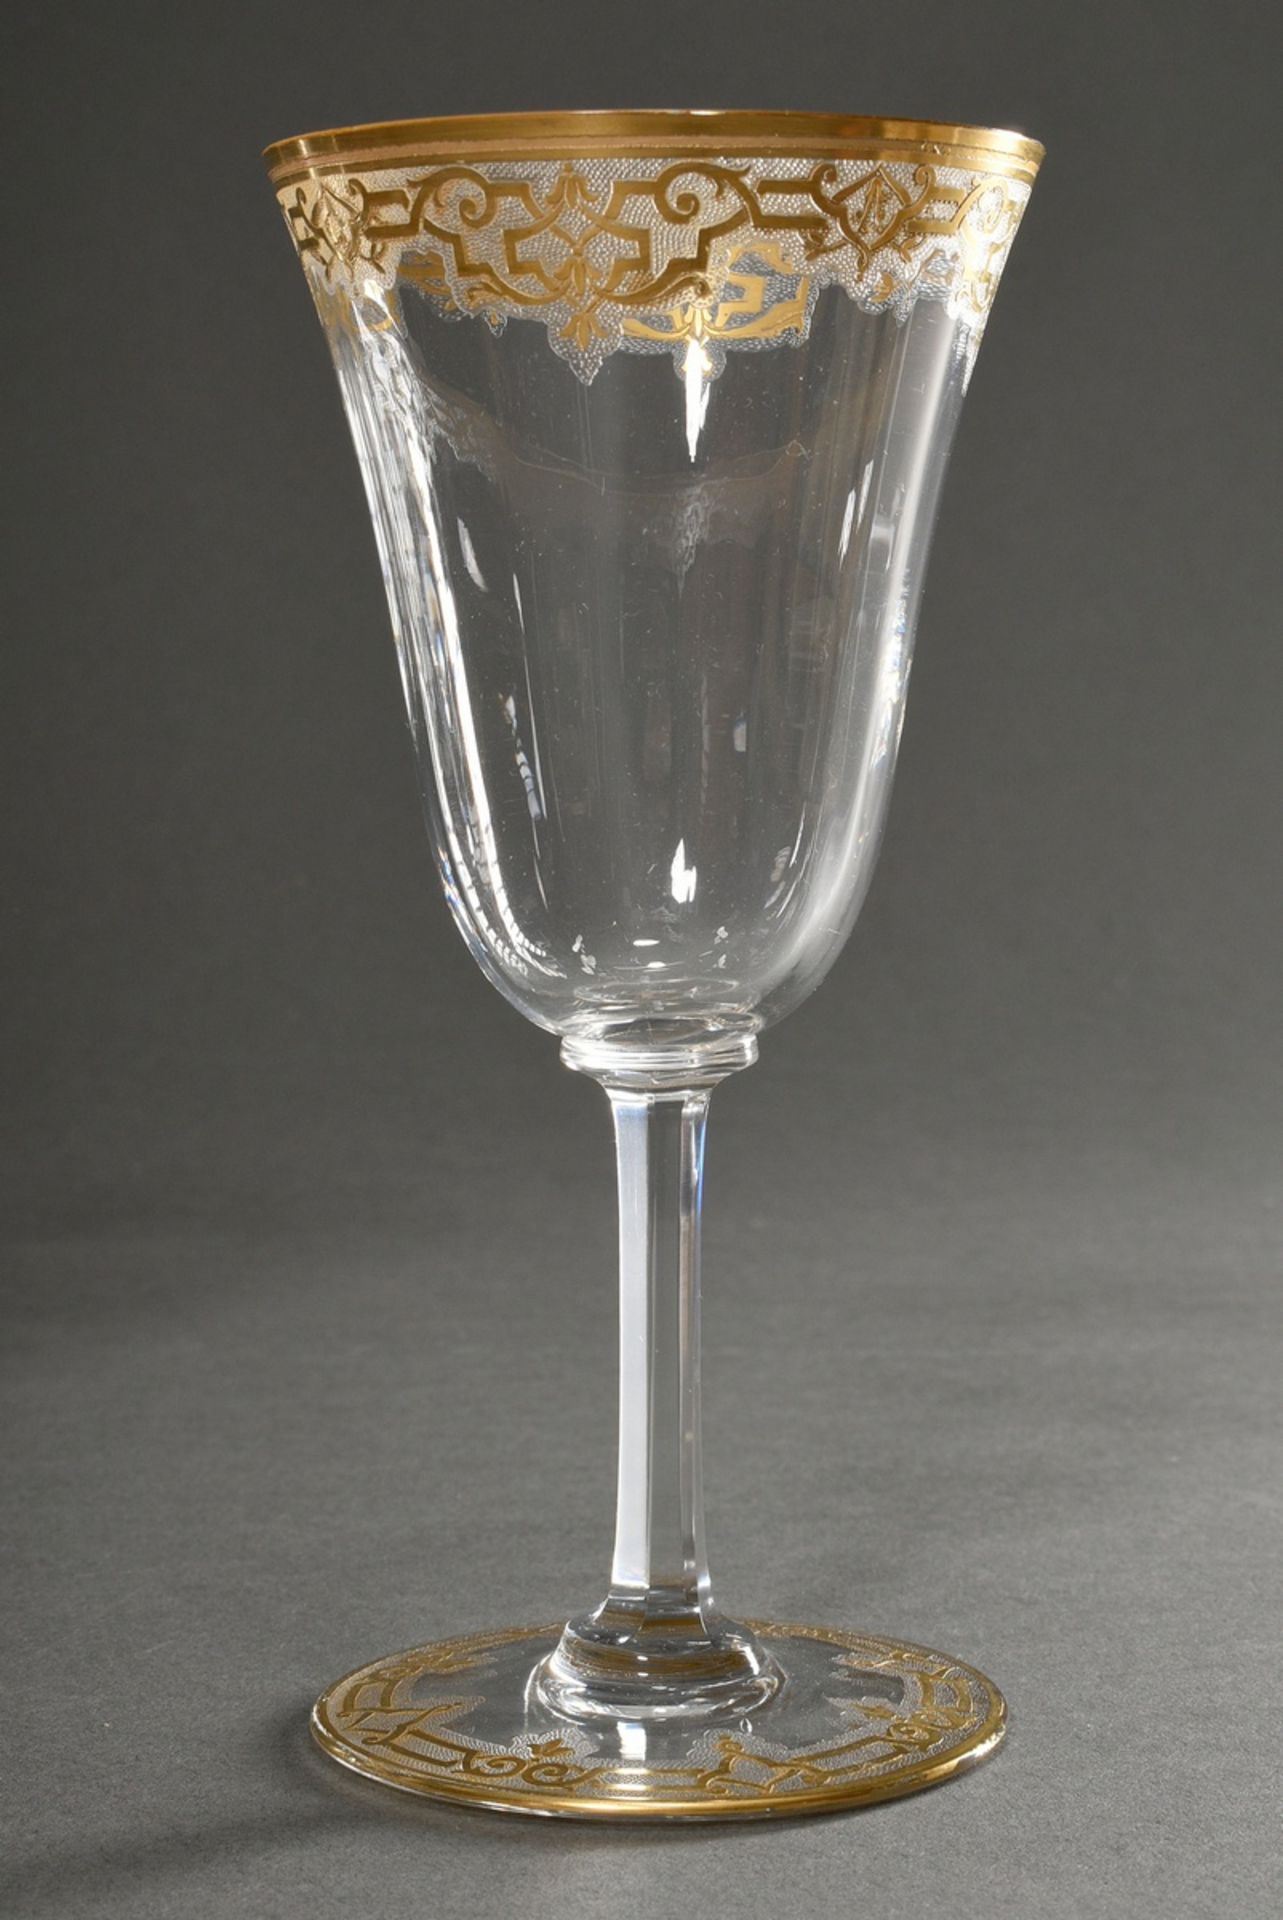 7 glasses with ornamental gold rim in Saint Louis style, h. 17.5cm - Image 2 of 5